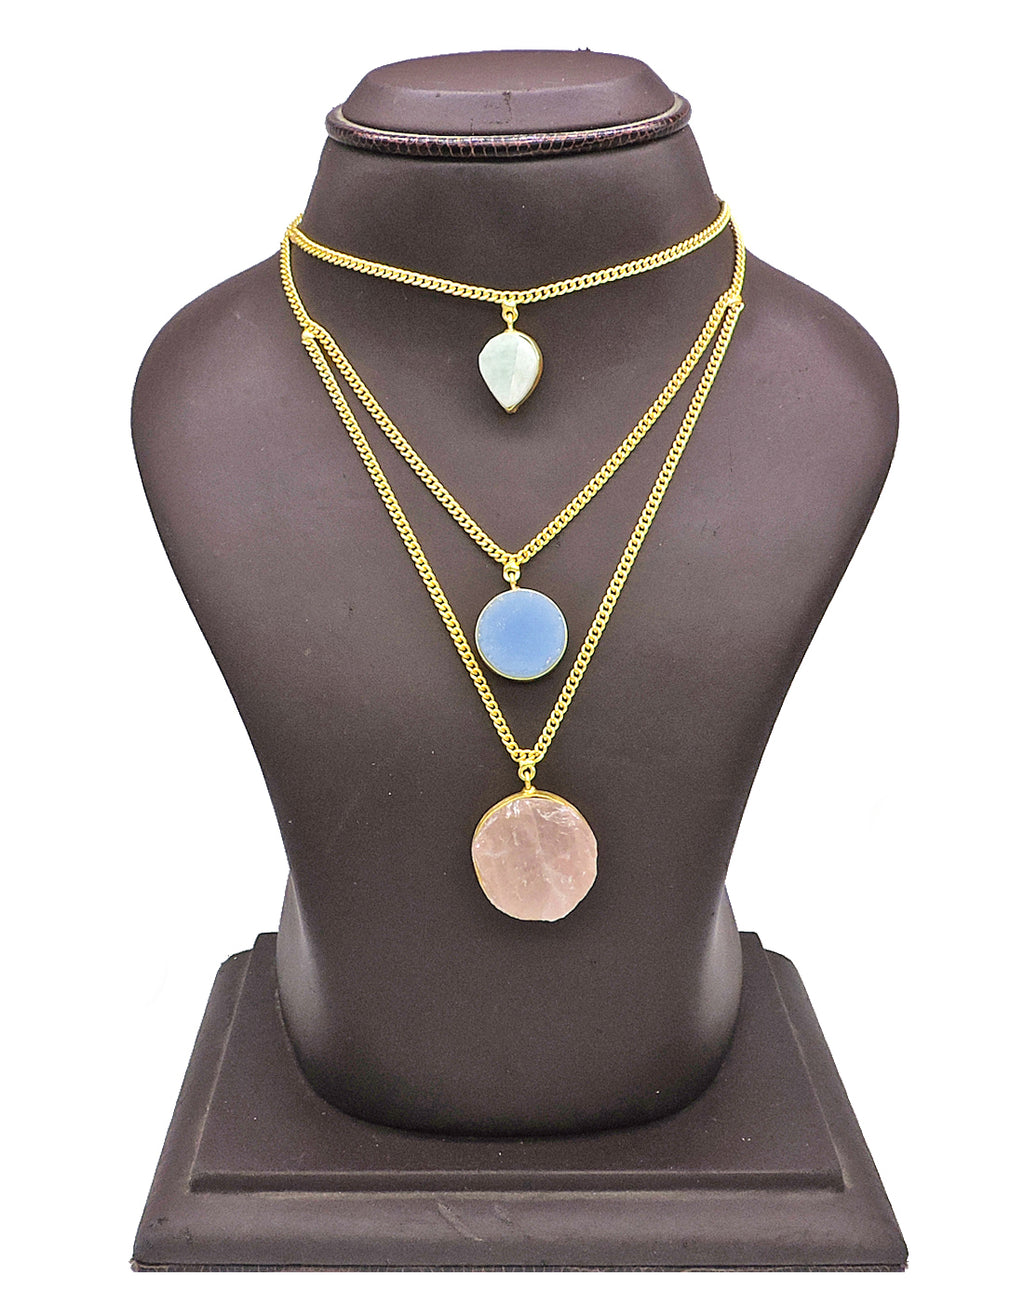 Jewelled Trio Layered Necklace - Statement Necklaces - Gold-Plated & Hypoallergenic Jewellery - Made in India - Dubai Jewellery - Dori